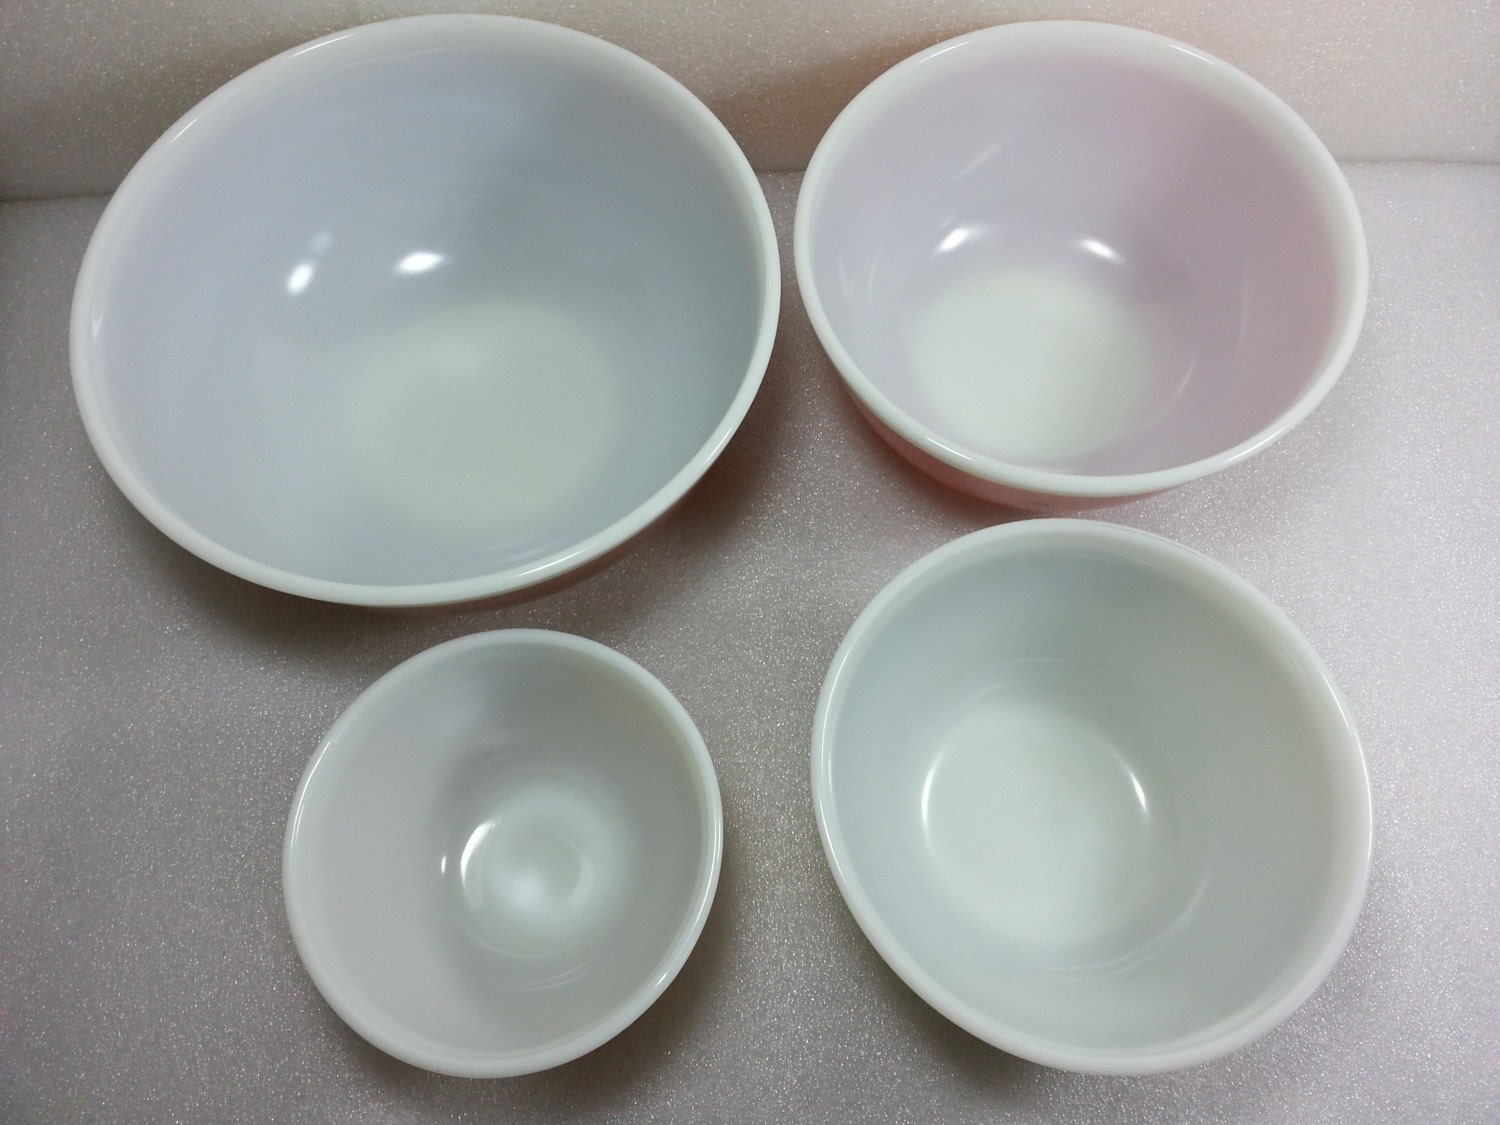 Vintage Pyrex Americana - White Rim Solid Color Nesting Mixing Bowls